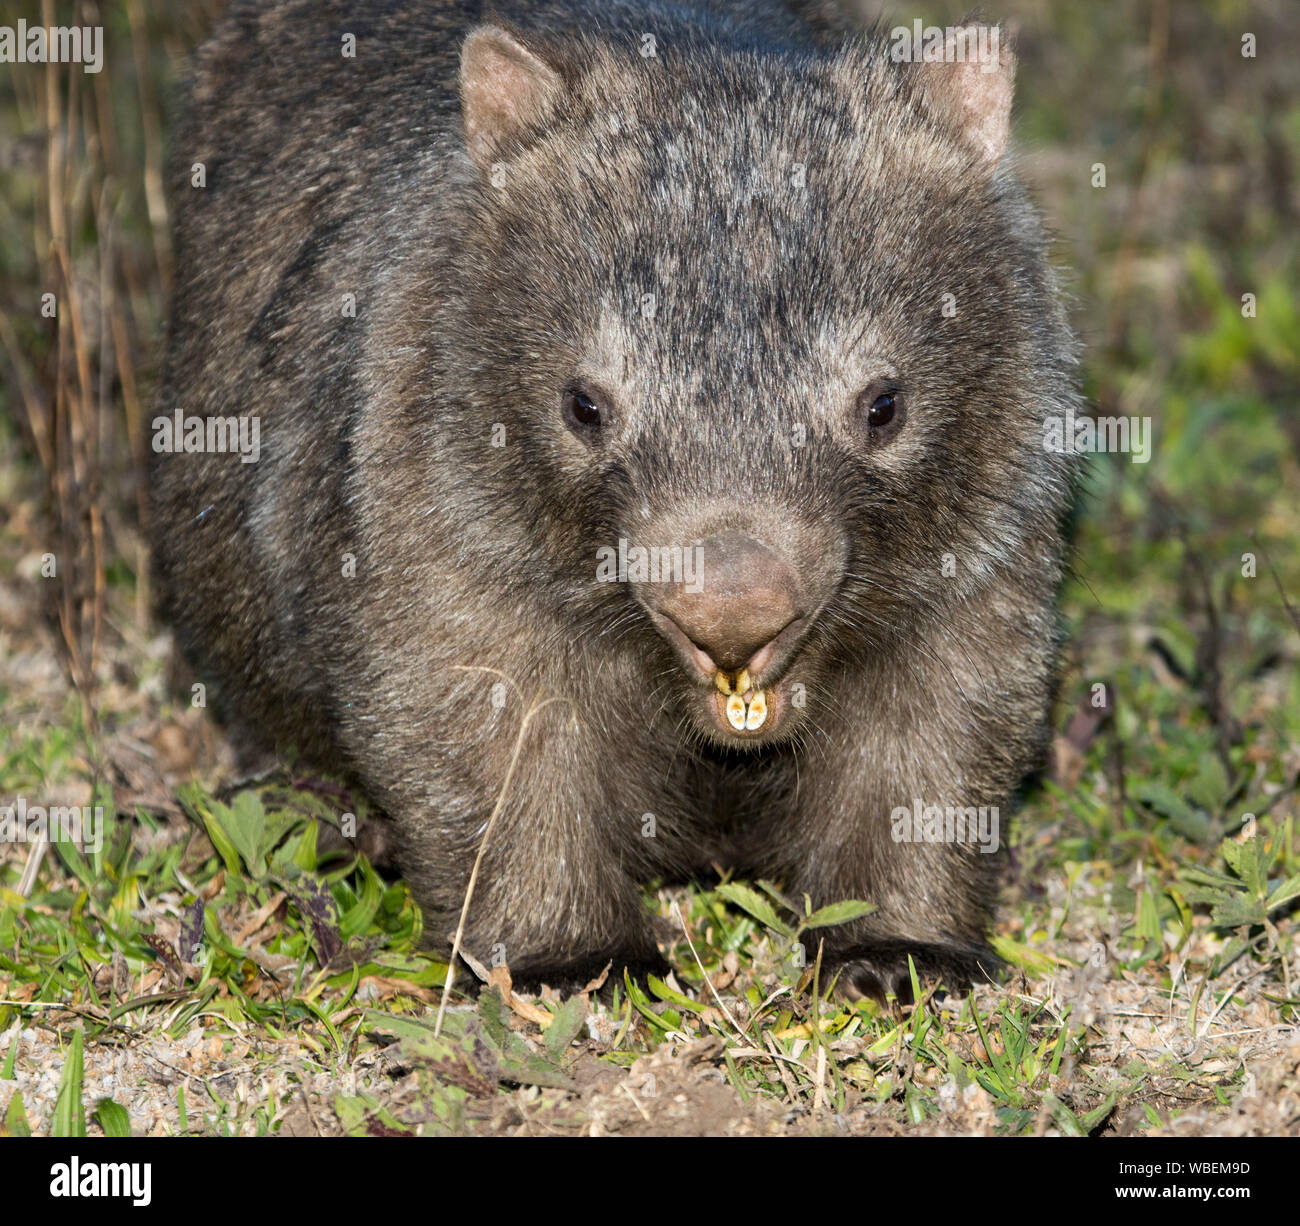 Common Wombat Vombatus Ursinus In The Wild And Staring At Camera With Large Teeth Clearly Visible At Dharug National Park Nsw Australia Stock Photo Alamy